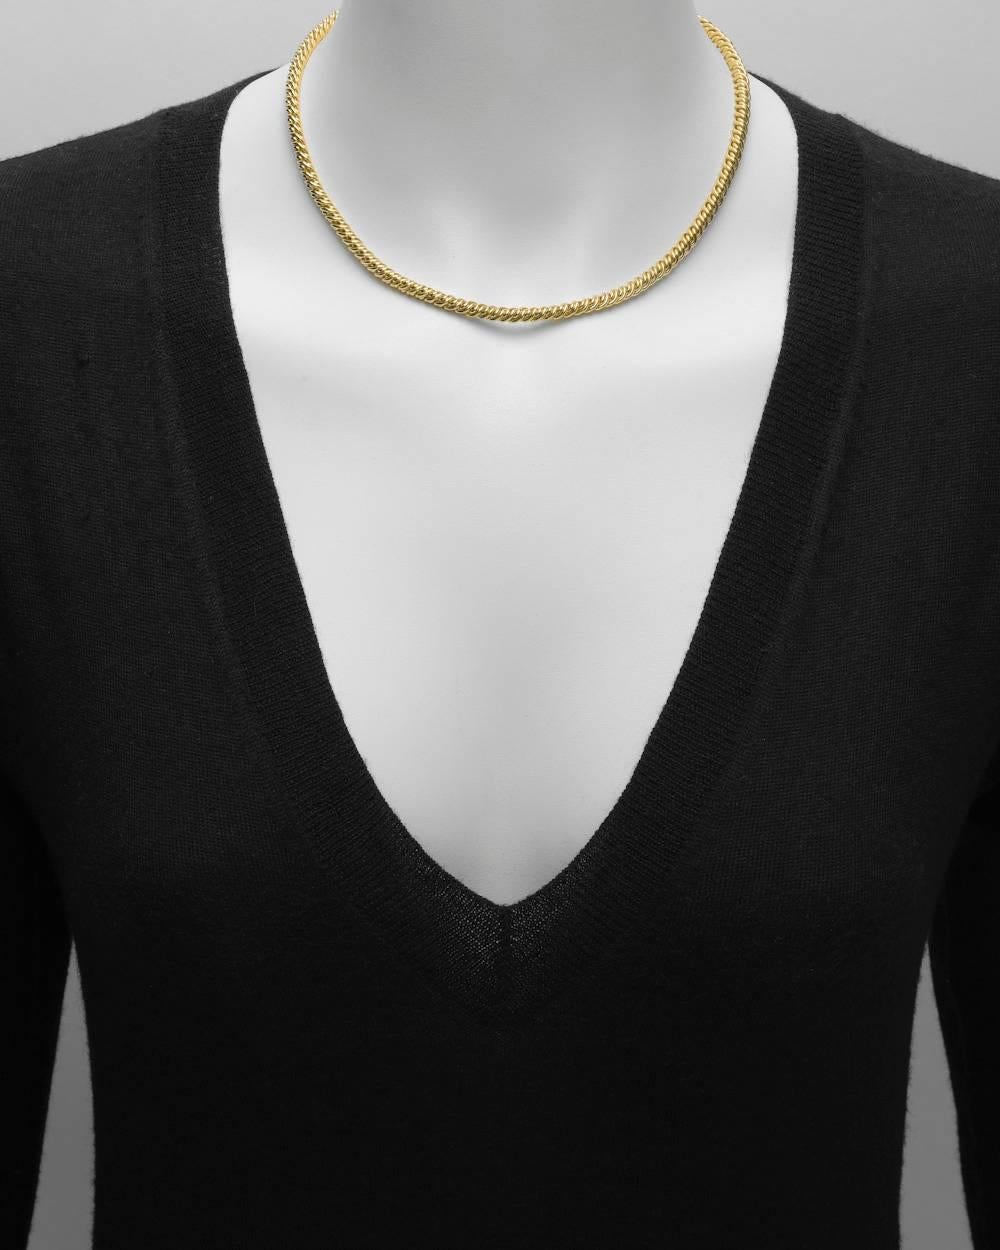 Twisted motif chain necklace in 18k yellow gold, signed Pomellato. 16.5" long and 0.15" wide (4mm).
